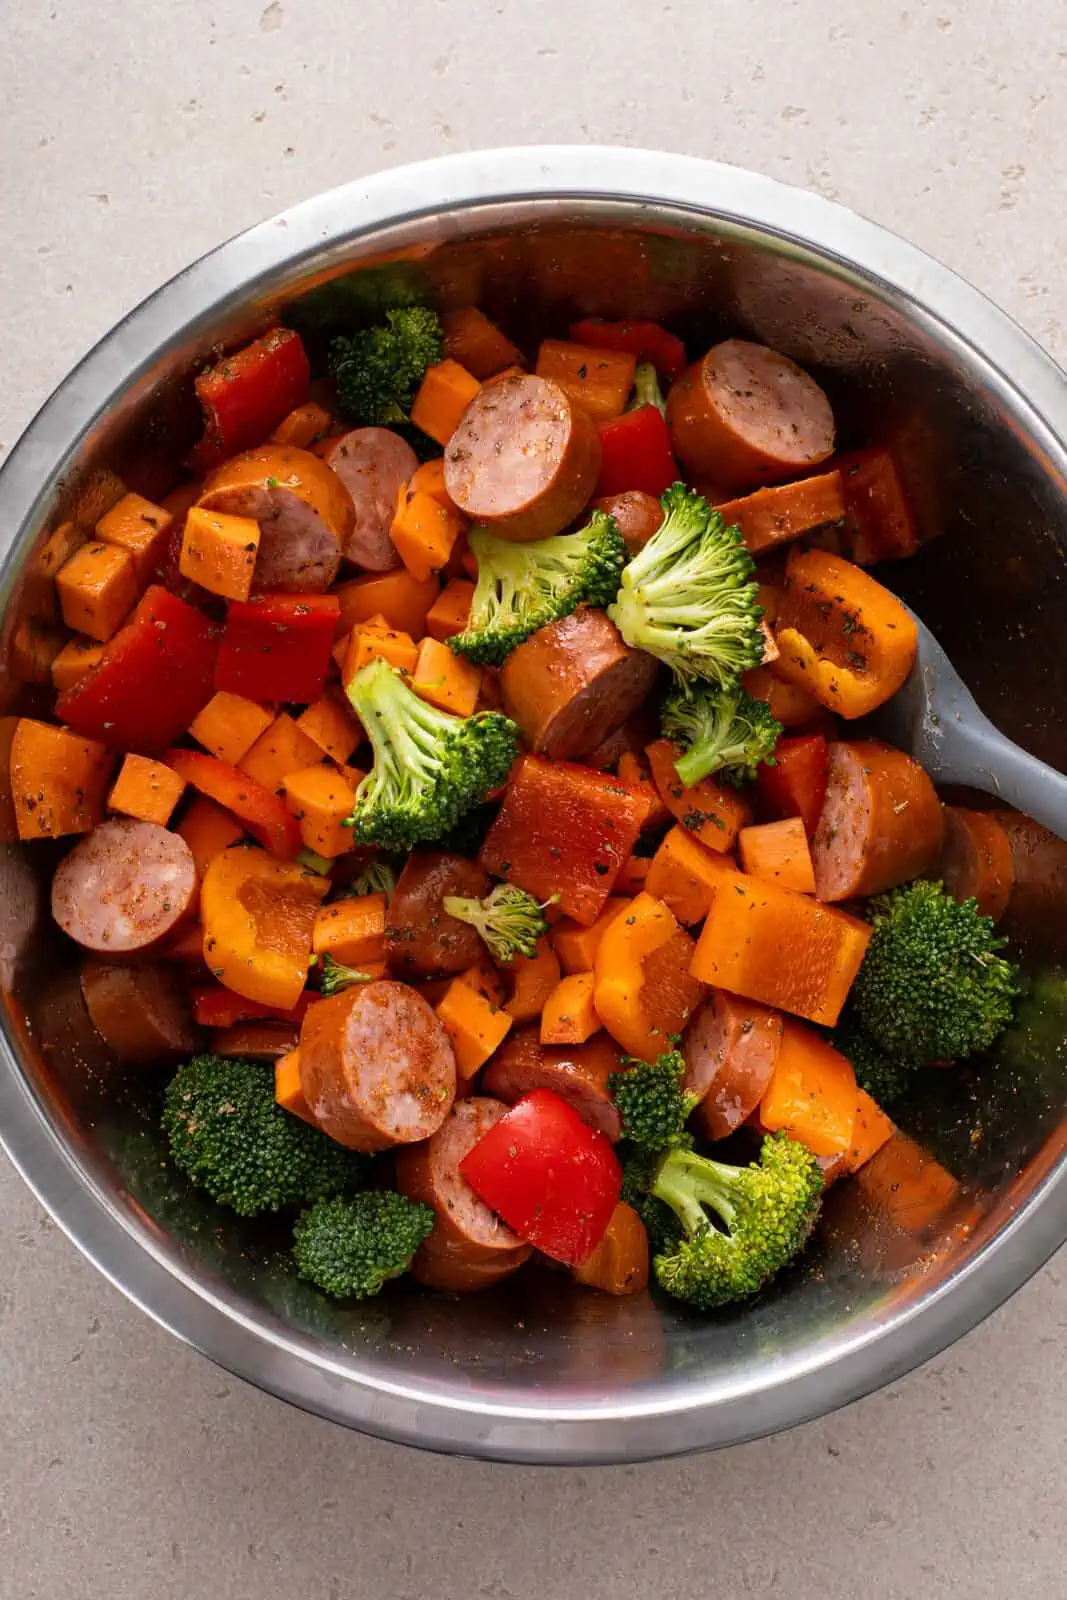 Smoked sausage and diced vegetables being mixed together in a metal bowl.